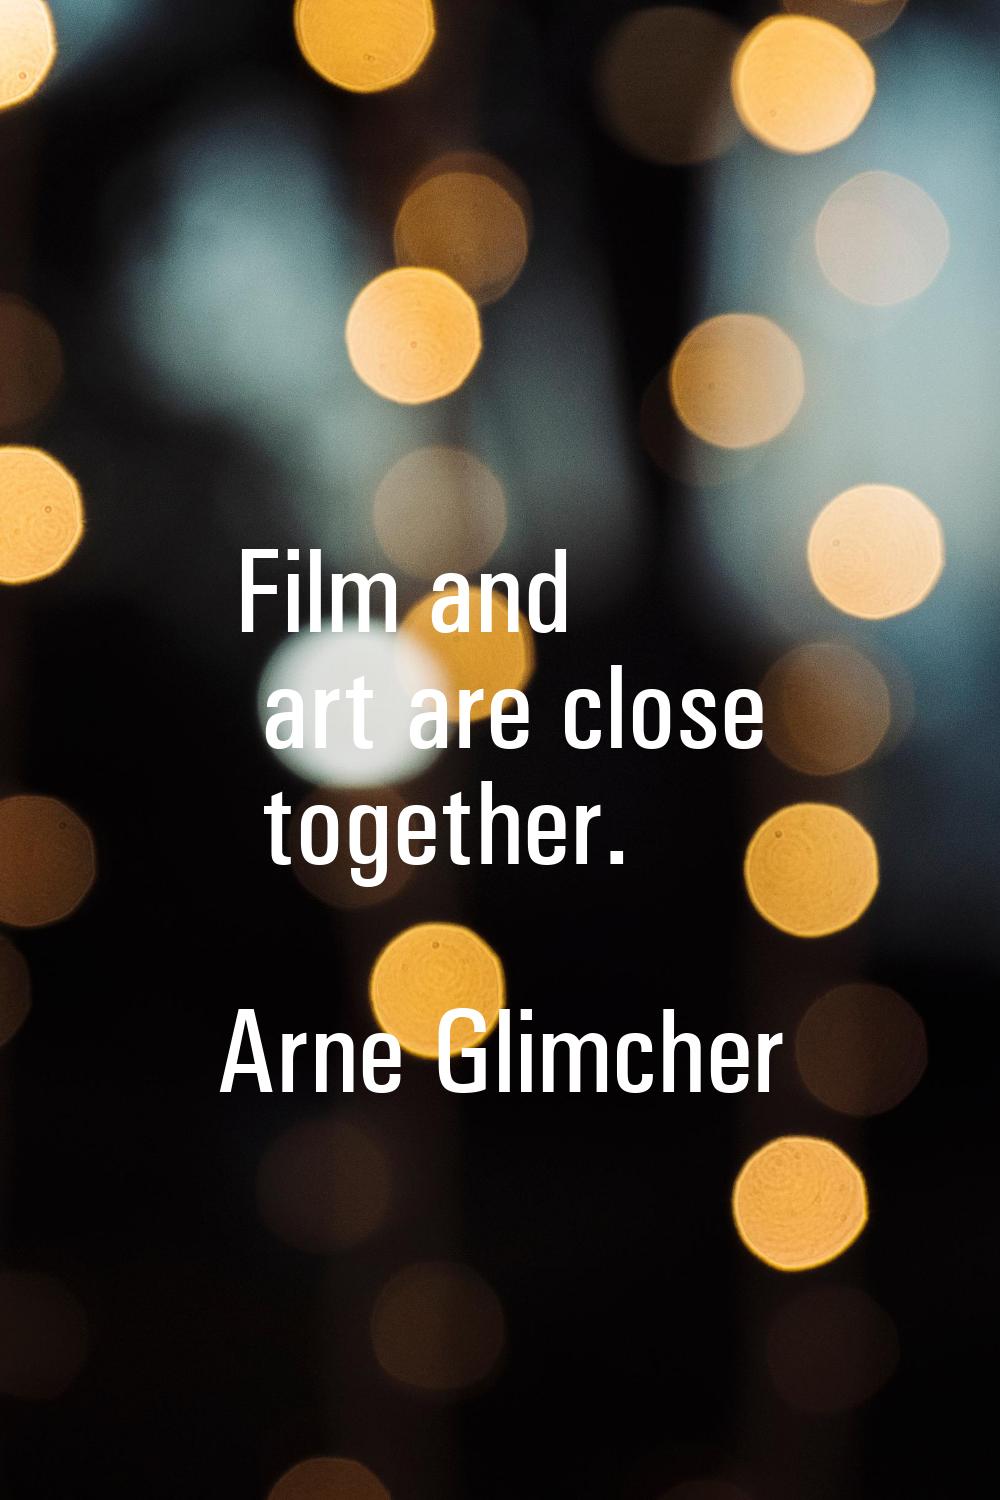 Film and art are close together.